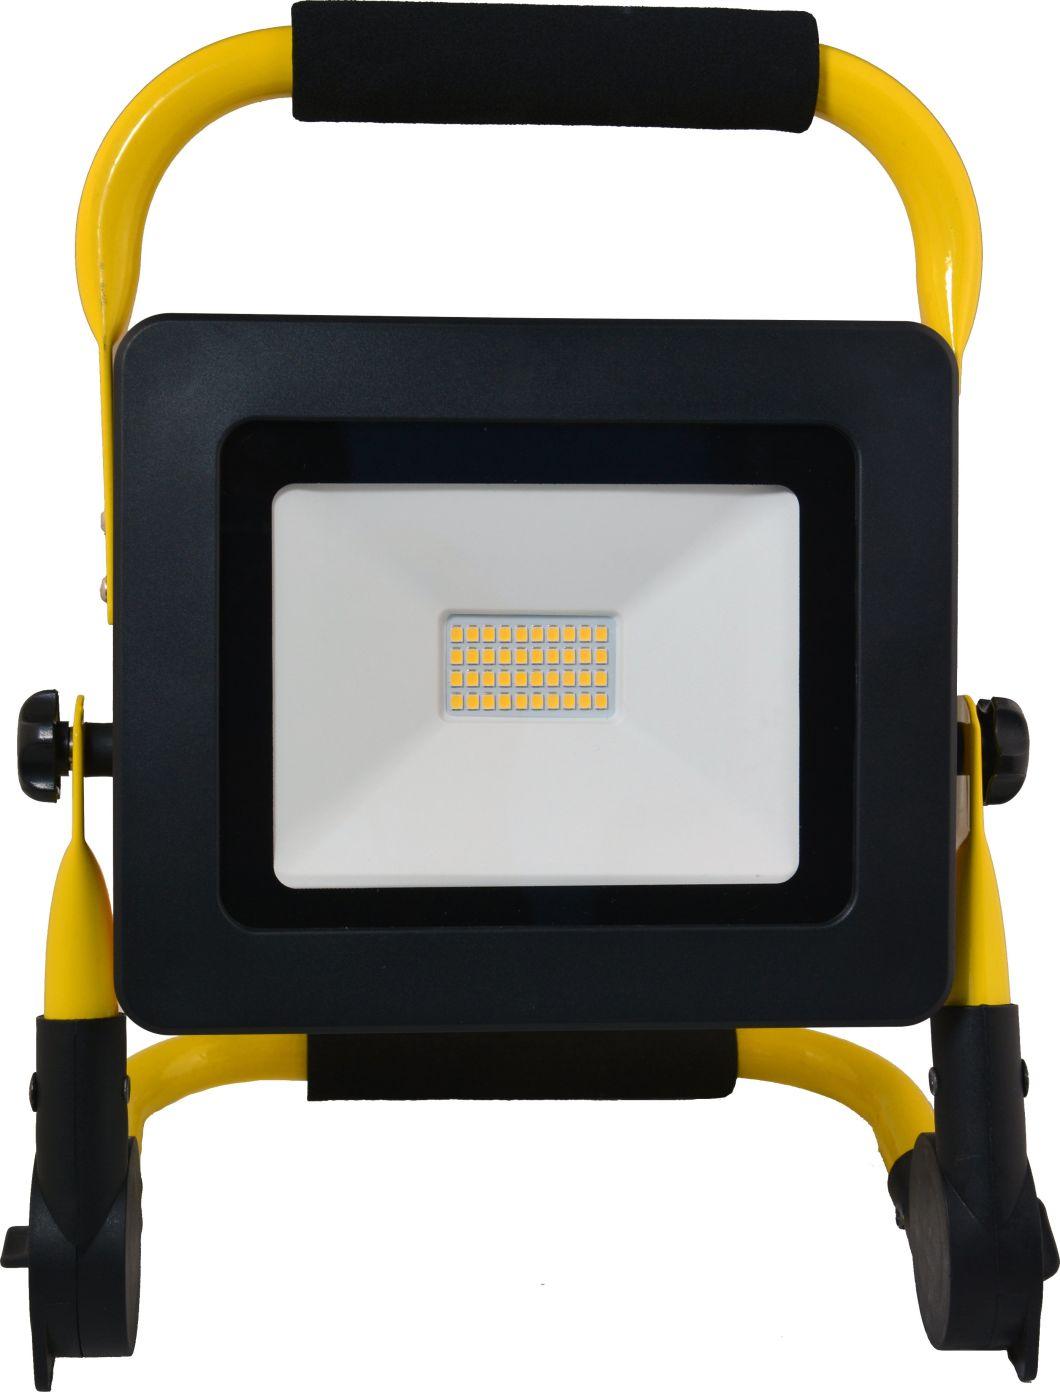 Rechargeable LED Work Lamp, SMD LED 30W, portable Worklight Waterproof, IP65, LED Floodlight TUV EMC CE ERP